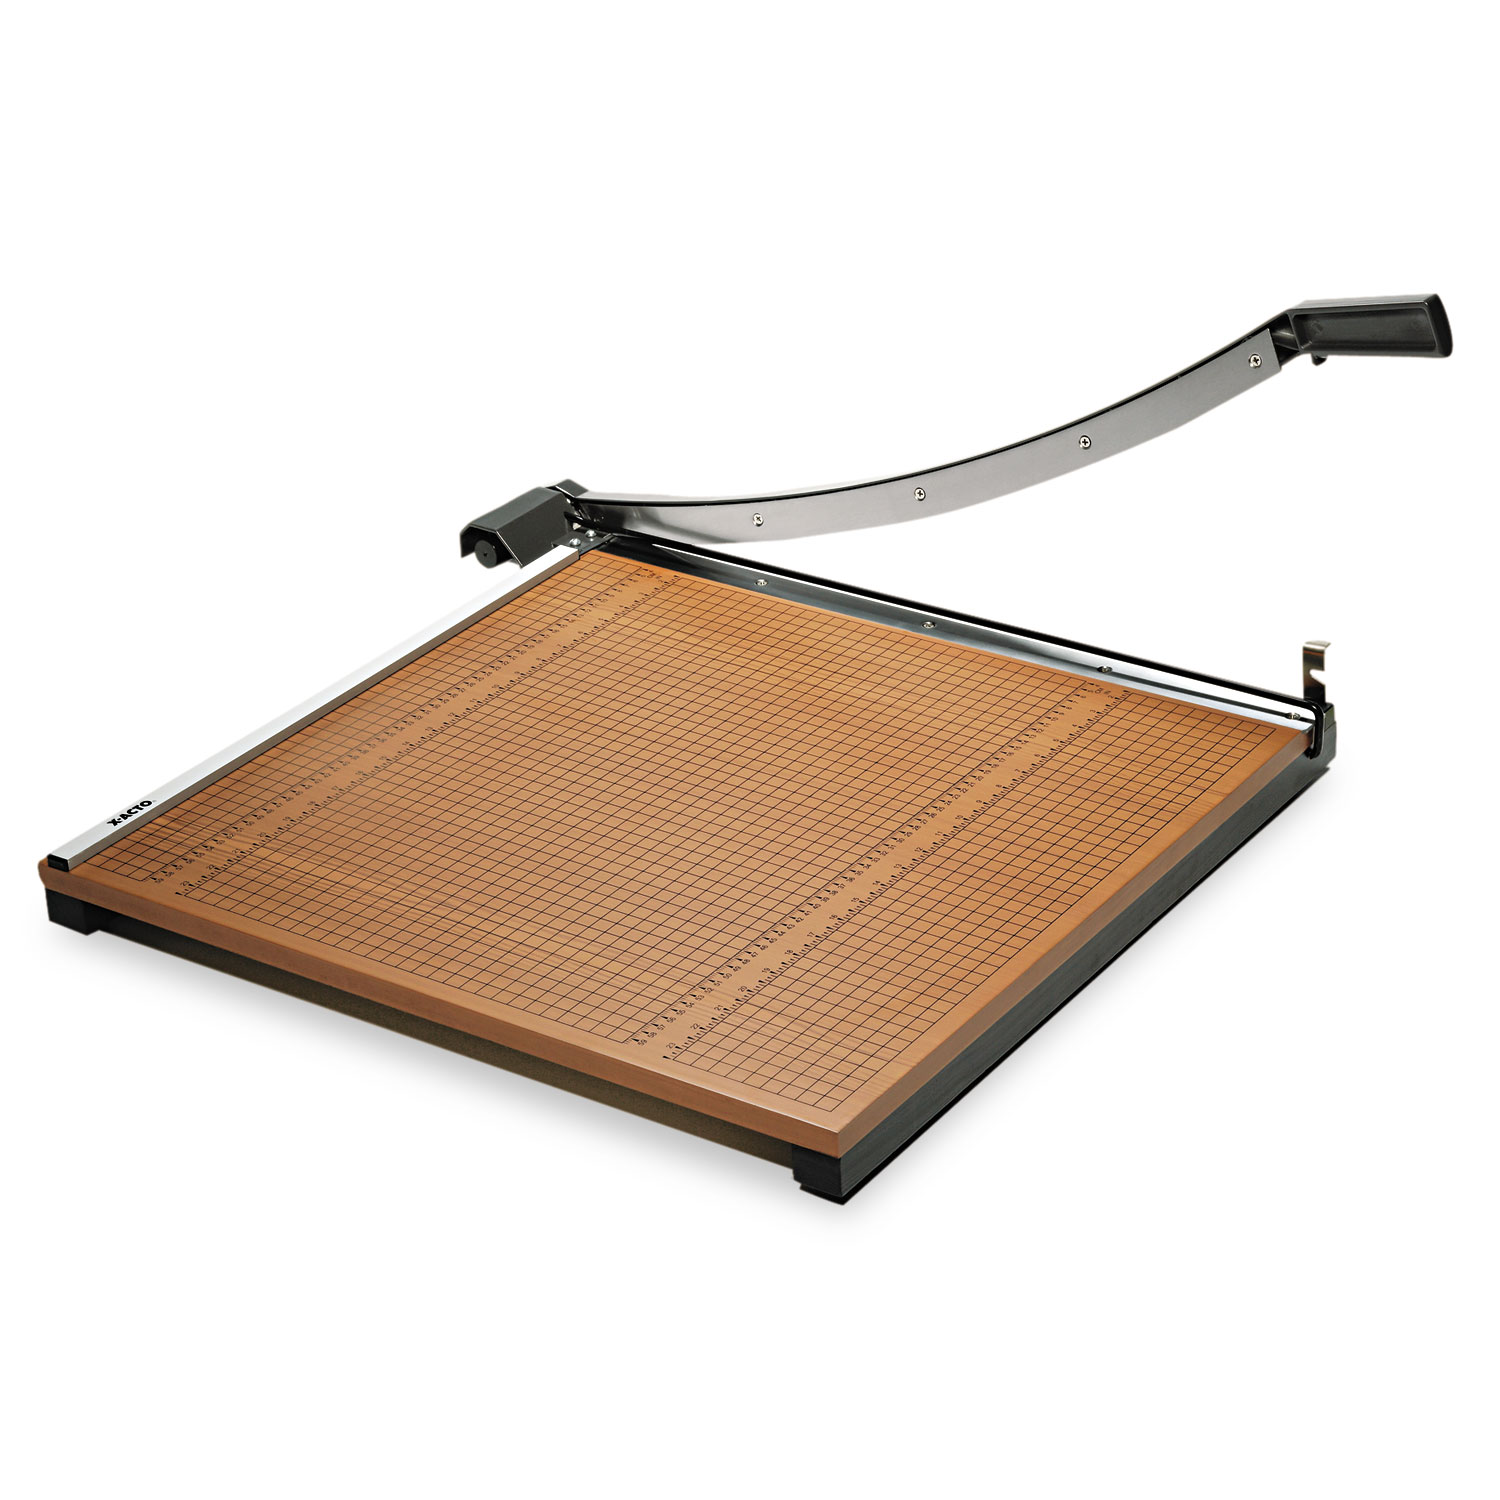 Guillotine Paper Cutter Wood Base, Cut Sheets Paper, Photos